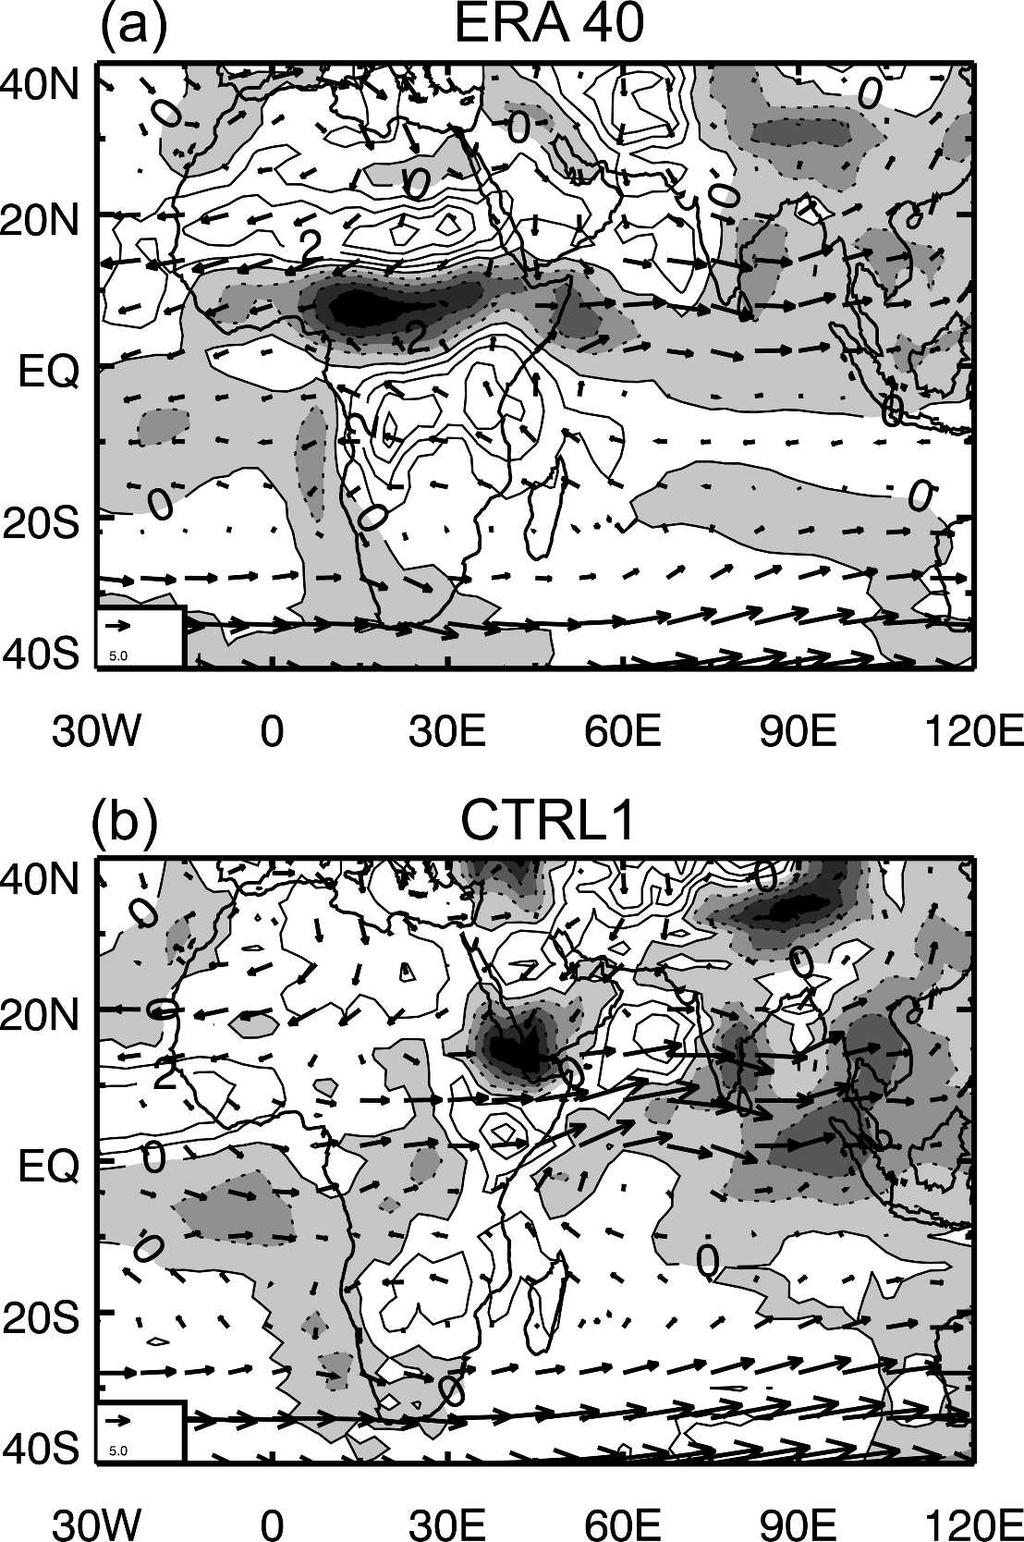 The separation between African and Asian monsoon precipitation is much clearer in ERA-40 than in CTRL1. nitude in both CTRL1 and ERA-40 but precipitation is much more intense in the simulation.